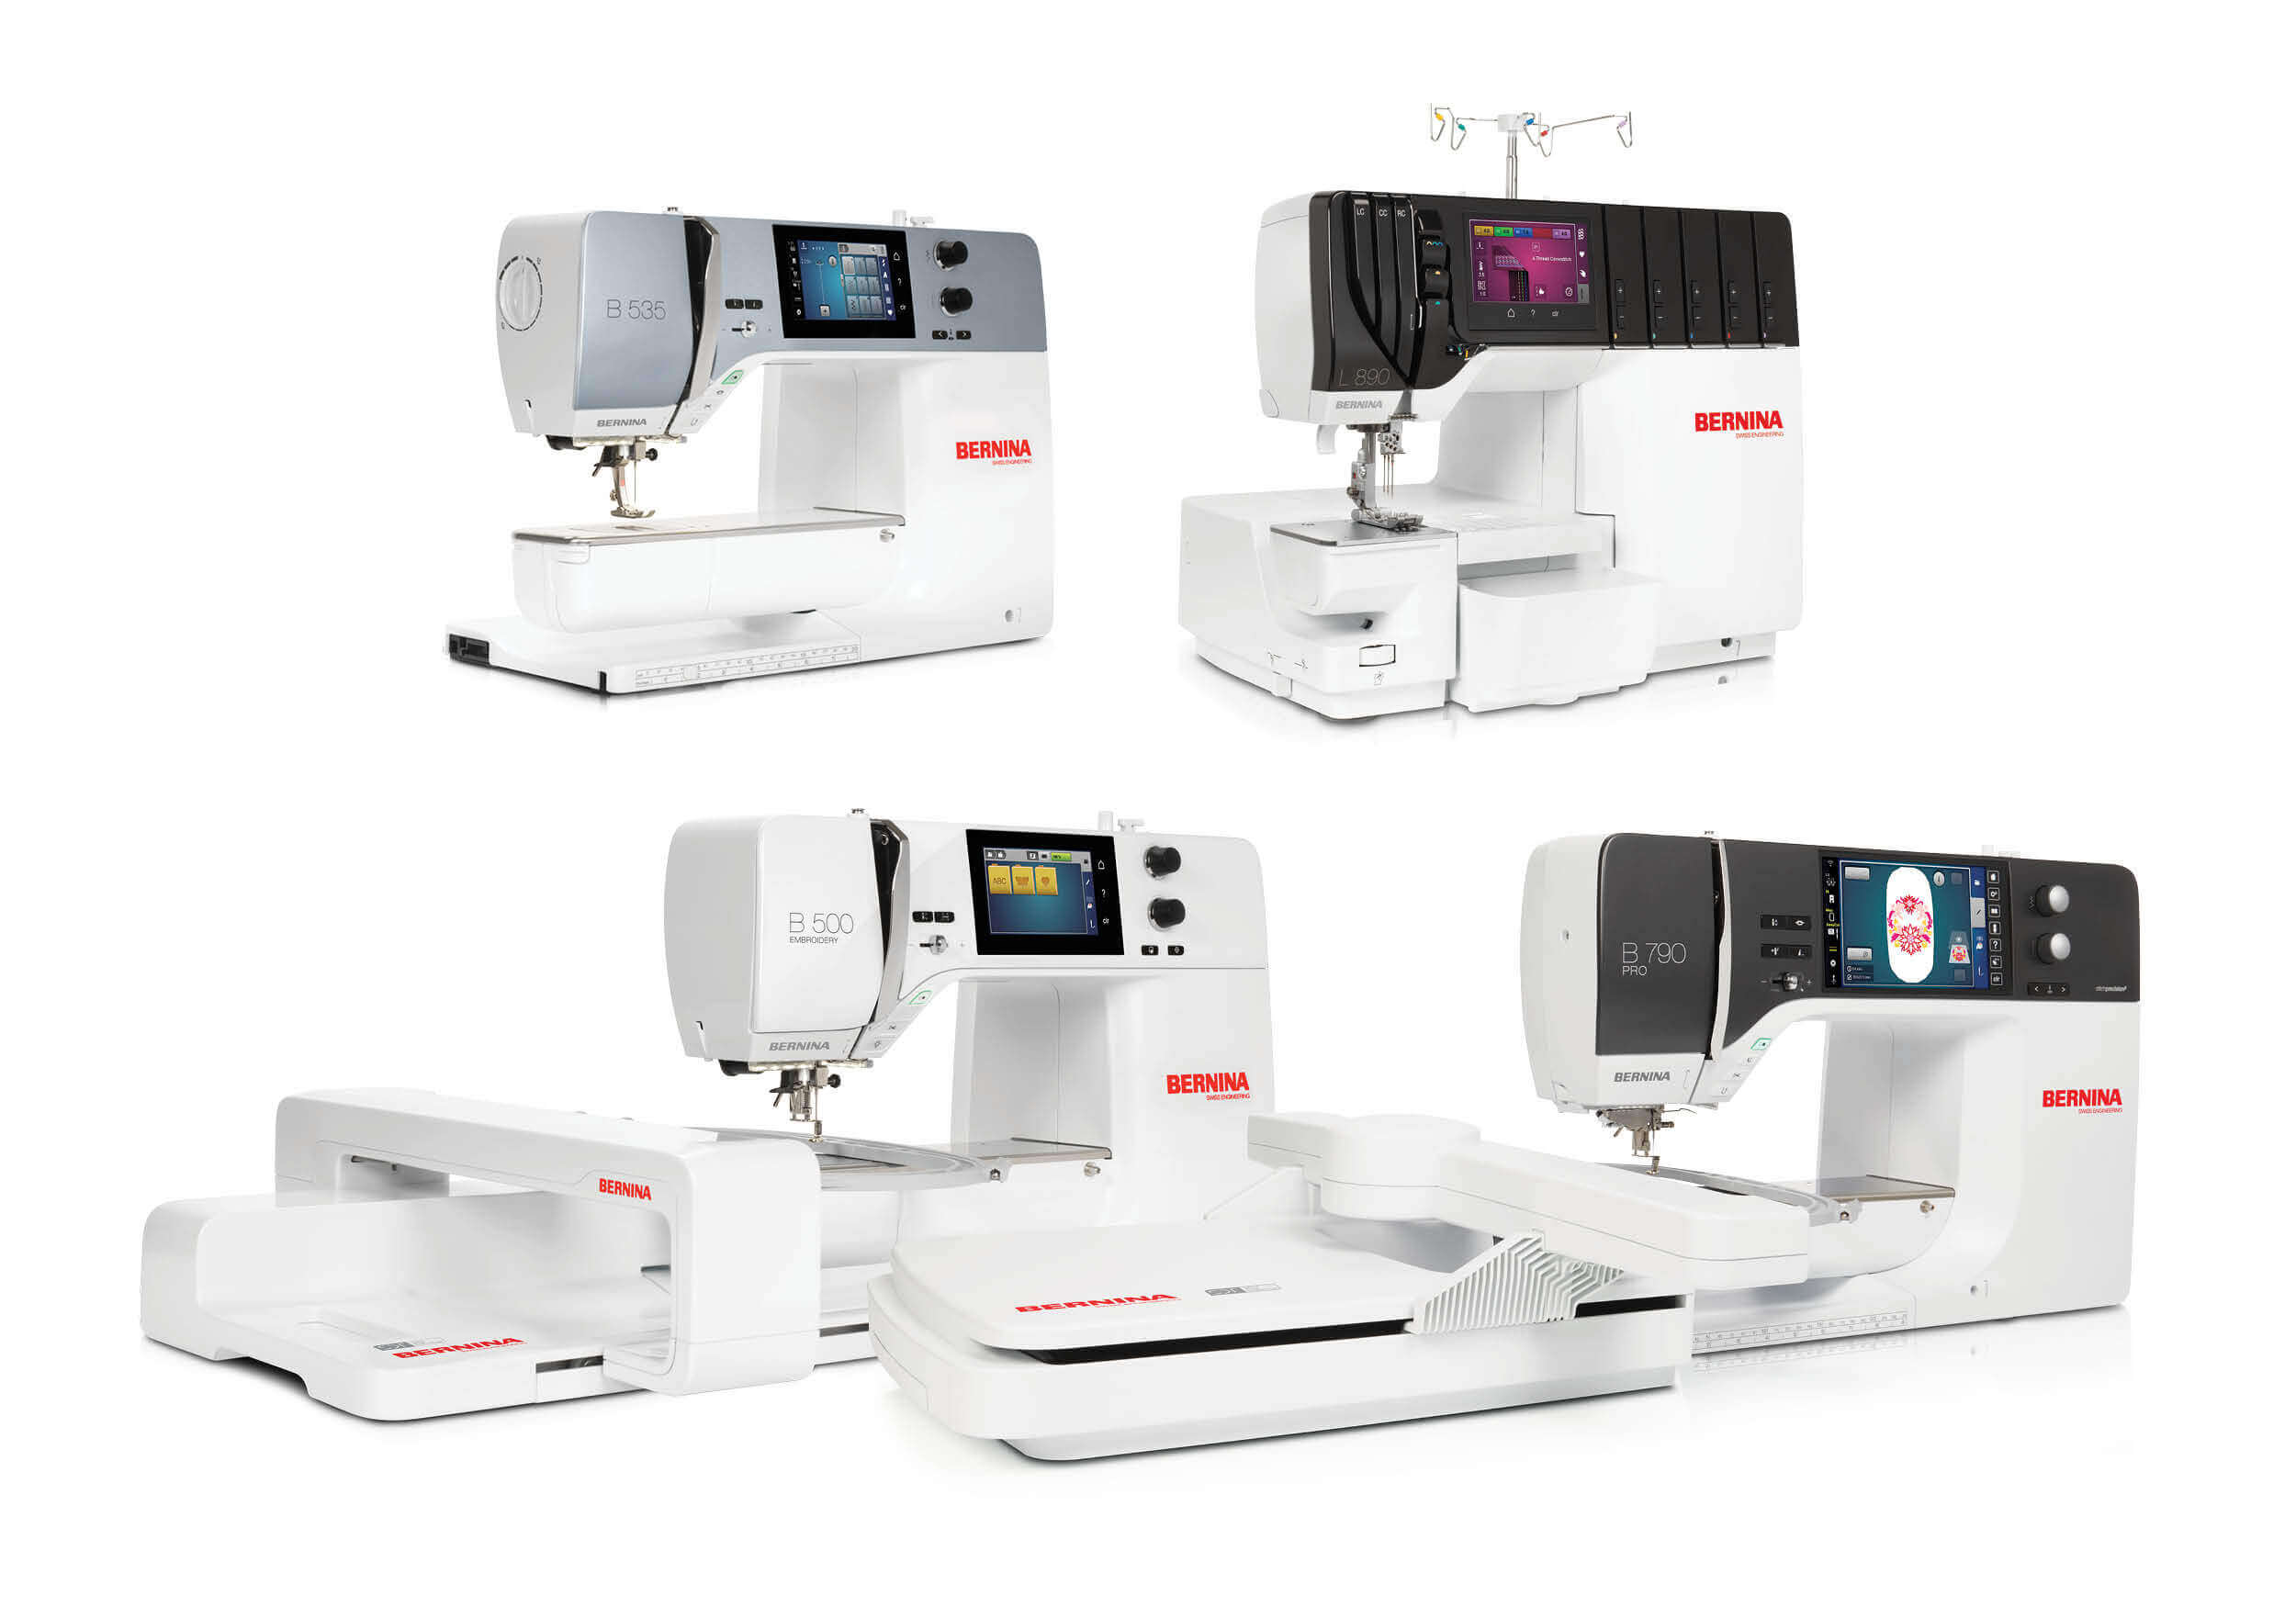 Get FREE Gift package when you purchase a select BERNINA machine!